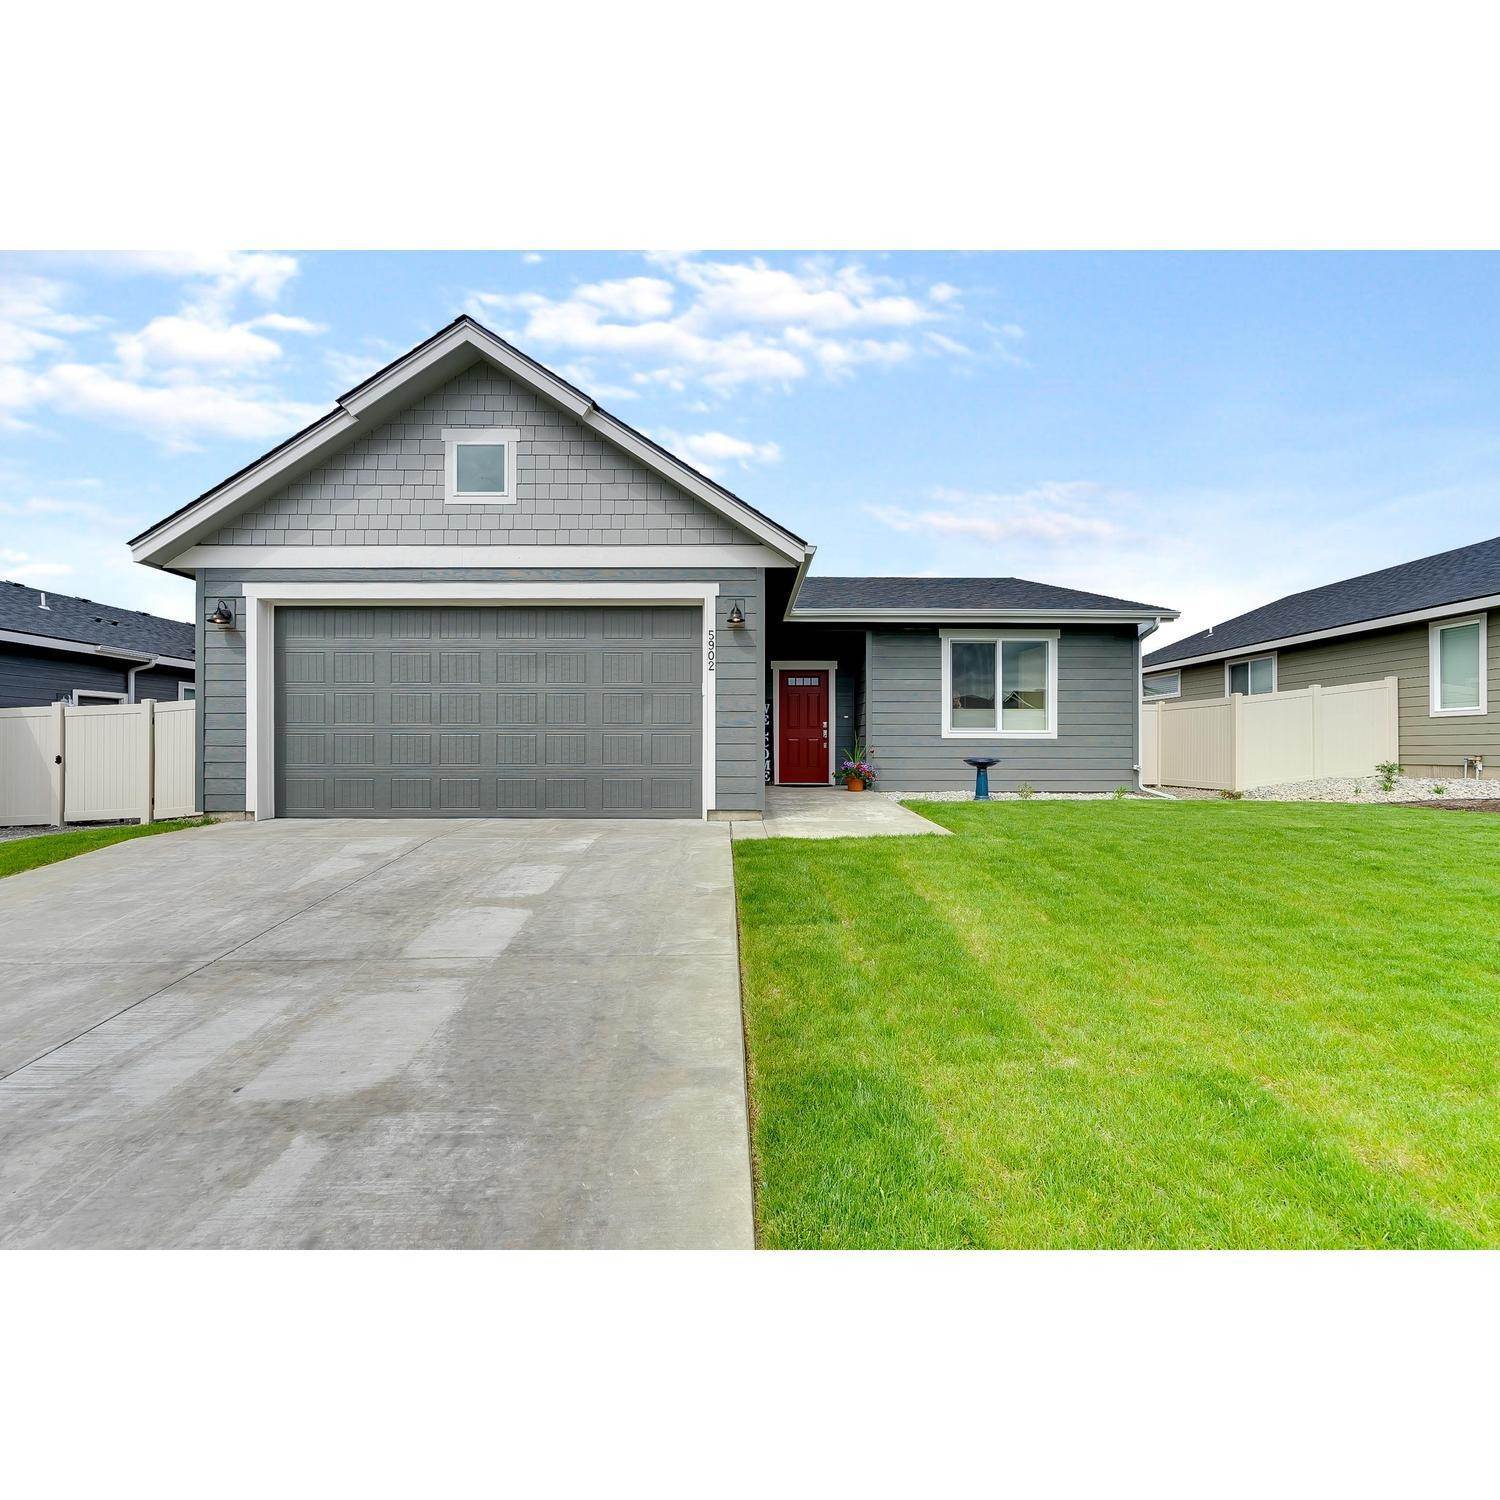 Single Family for Sale at Post Falls, ID 83854